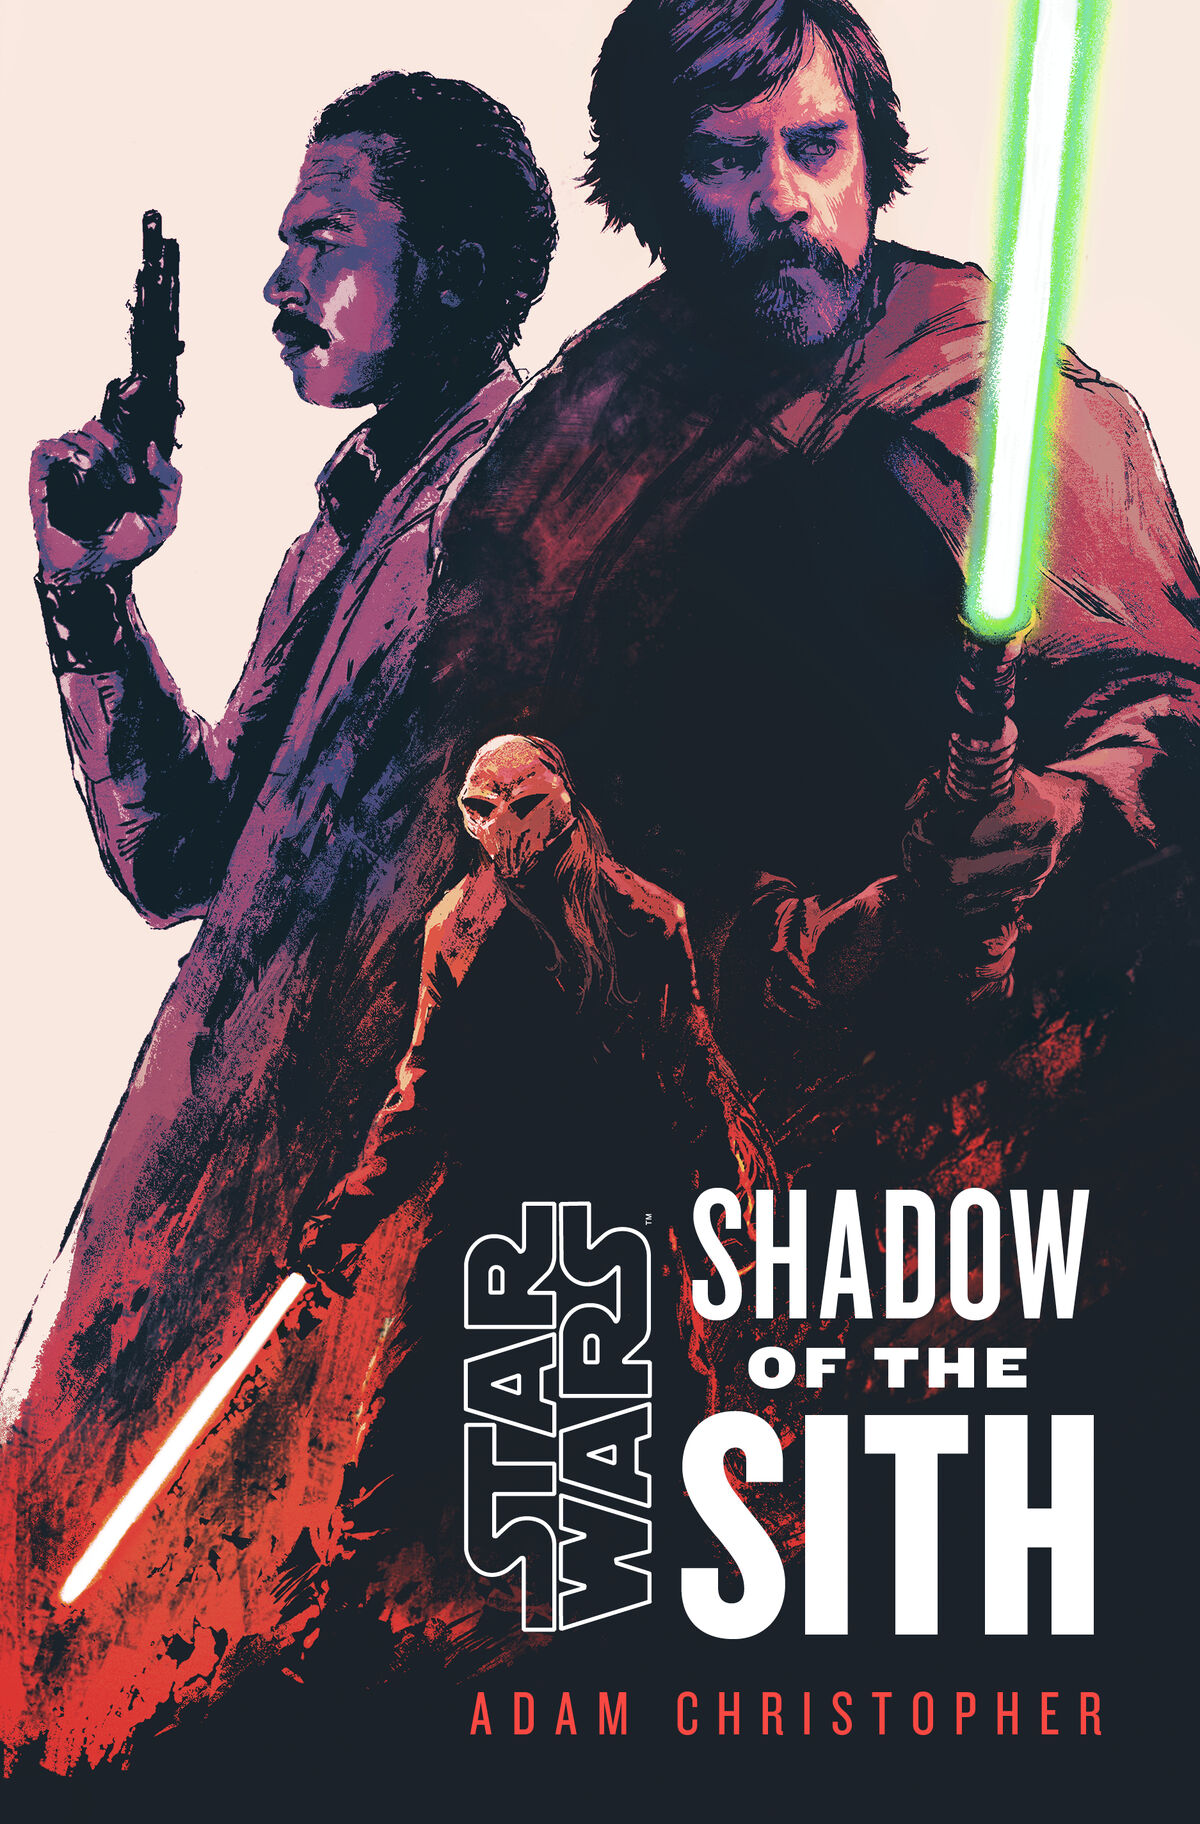 https://static.wikia.nocookie.net/starwars/images/e/e5/Shadow-of-the-Sith-Cover.jpg/revision/latest/scale-to-width-down/1200?cb=20220324191944